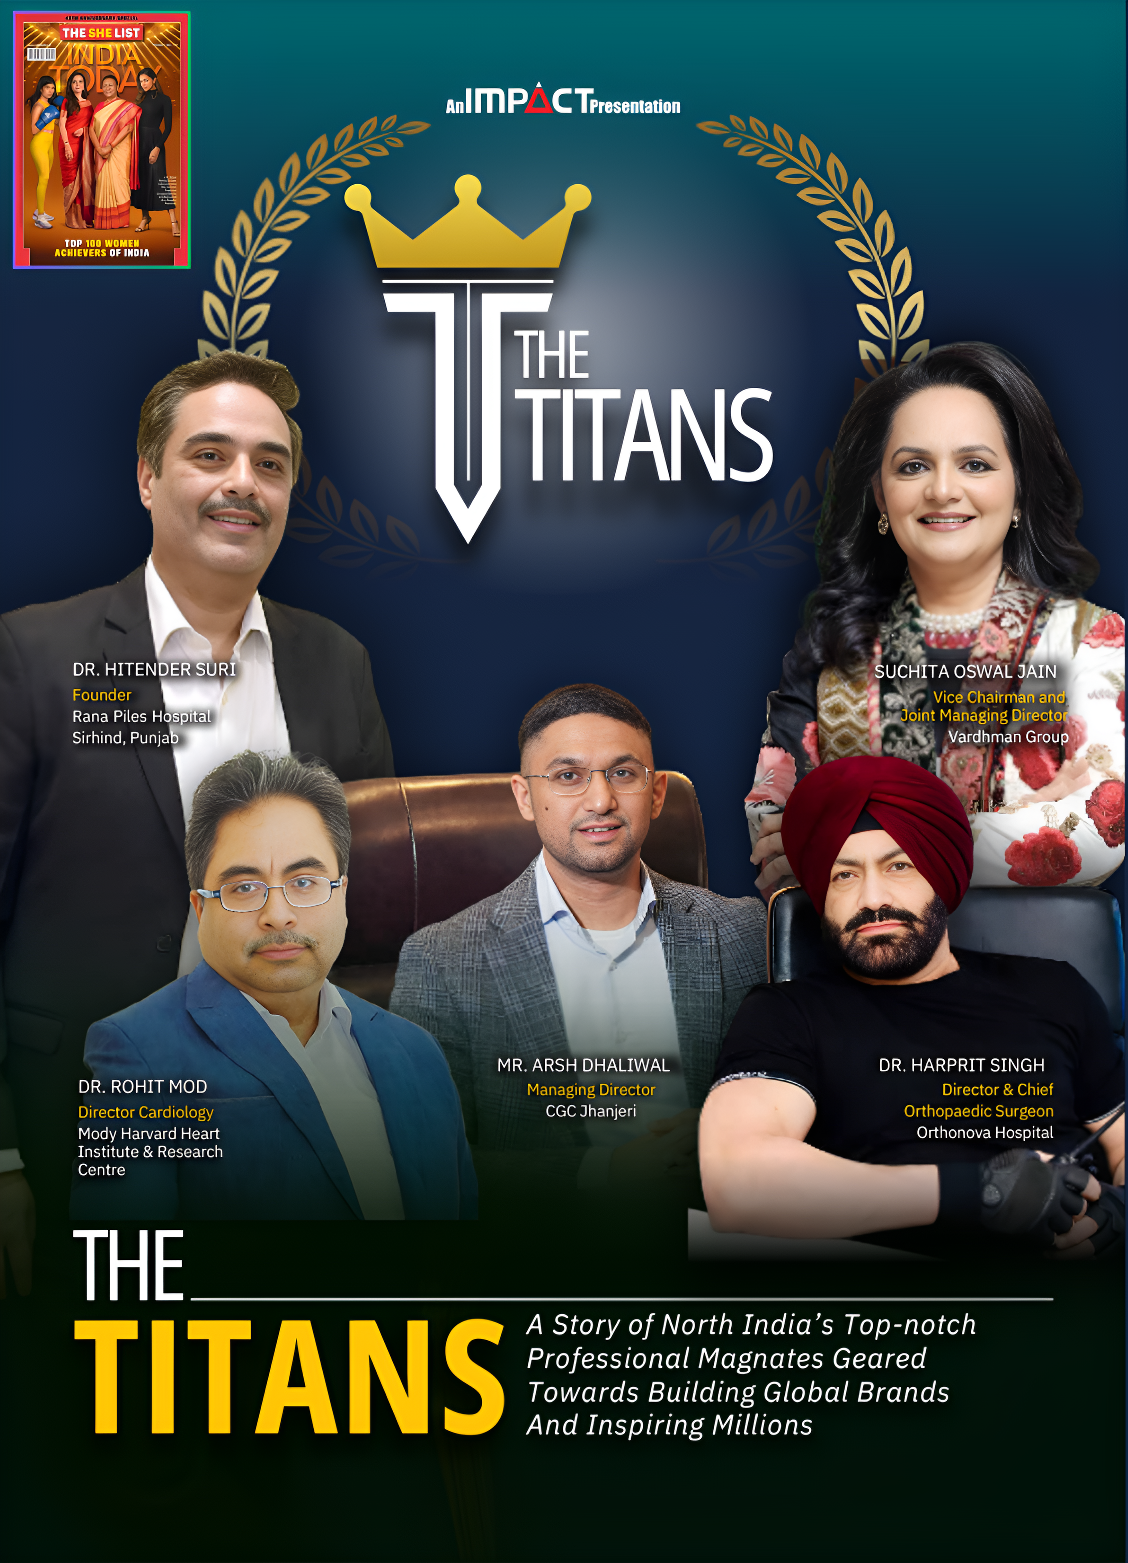 Dr. Hitender Suri Recognised as  “THE TITANS” by India Today Magazine